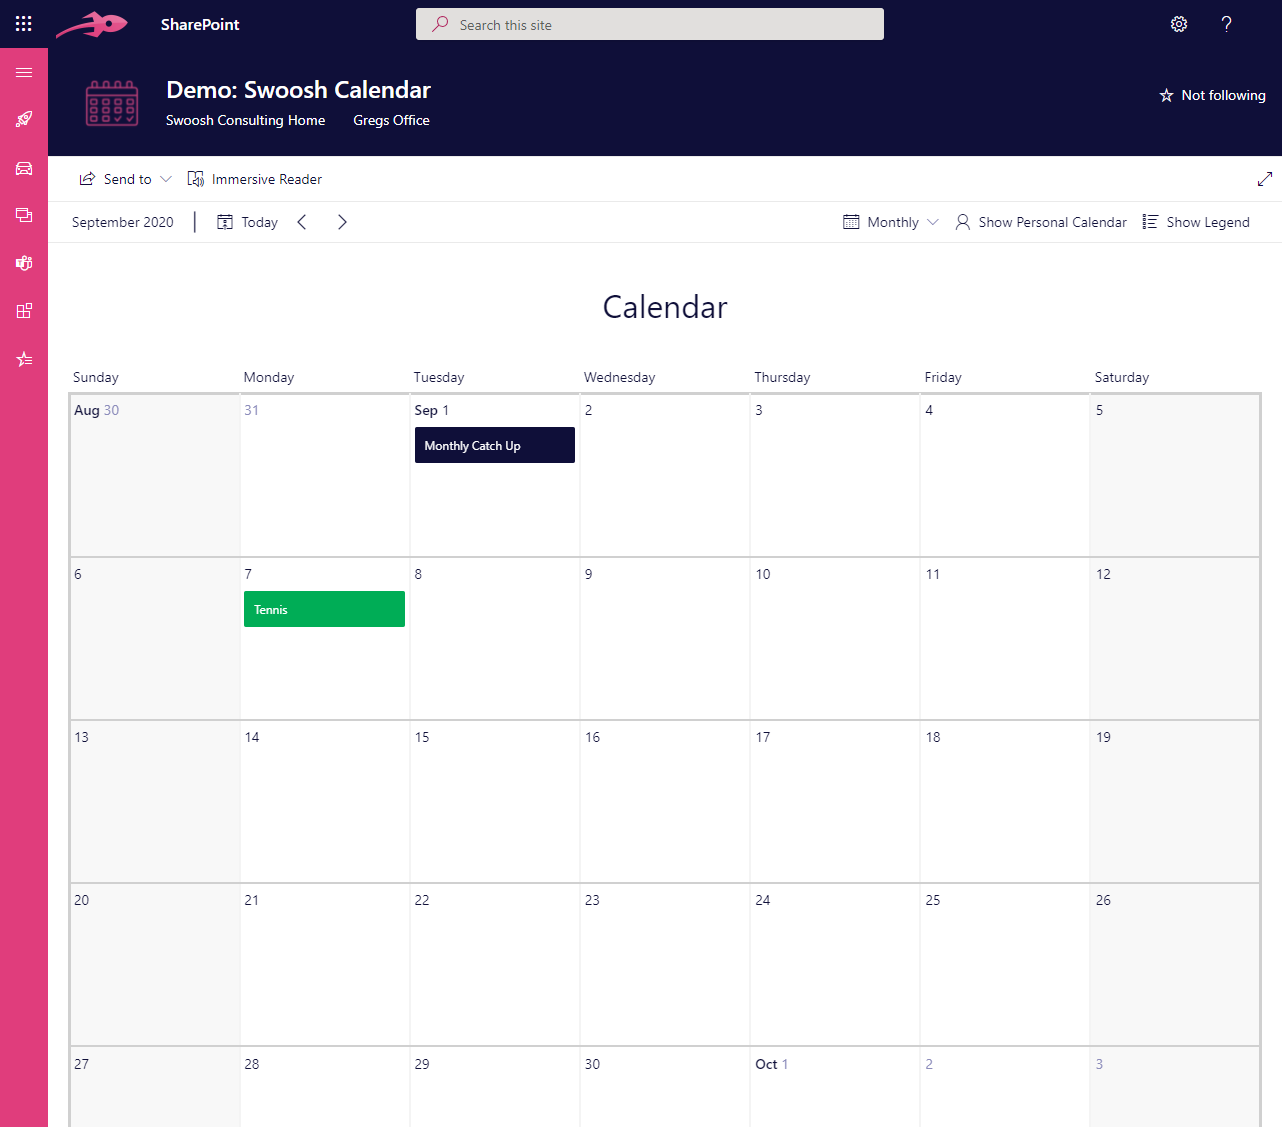 Calendar monthly view